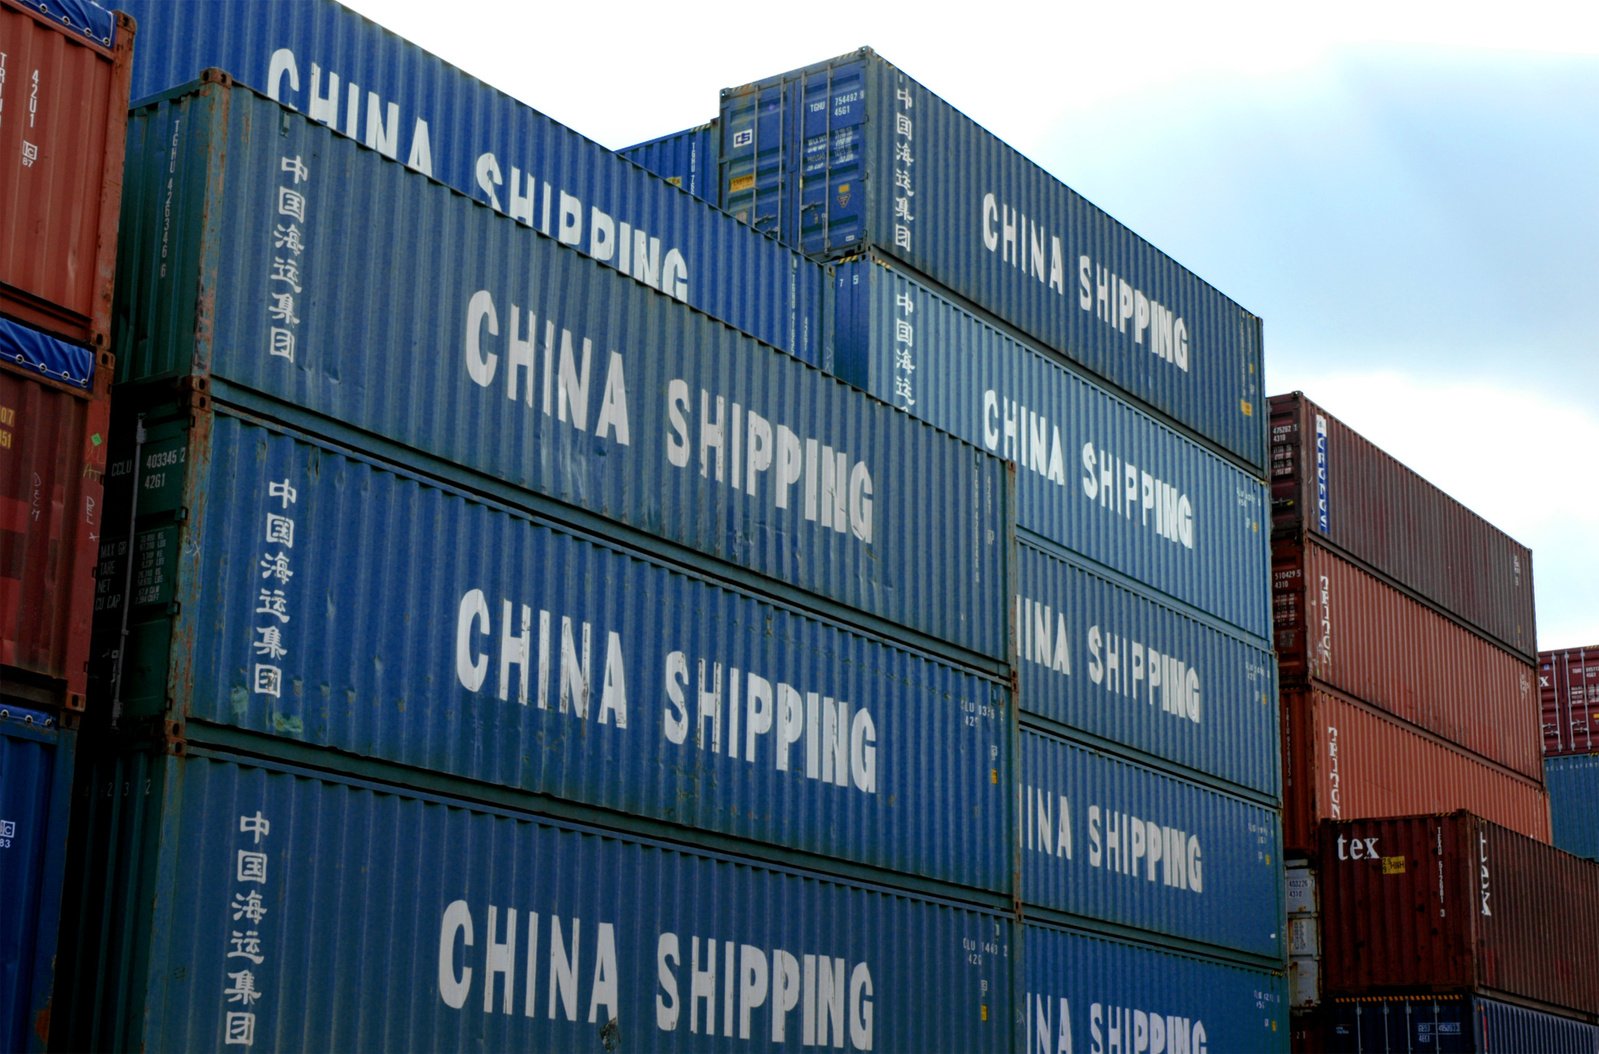 stack of cargo containers with china shipping written on them